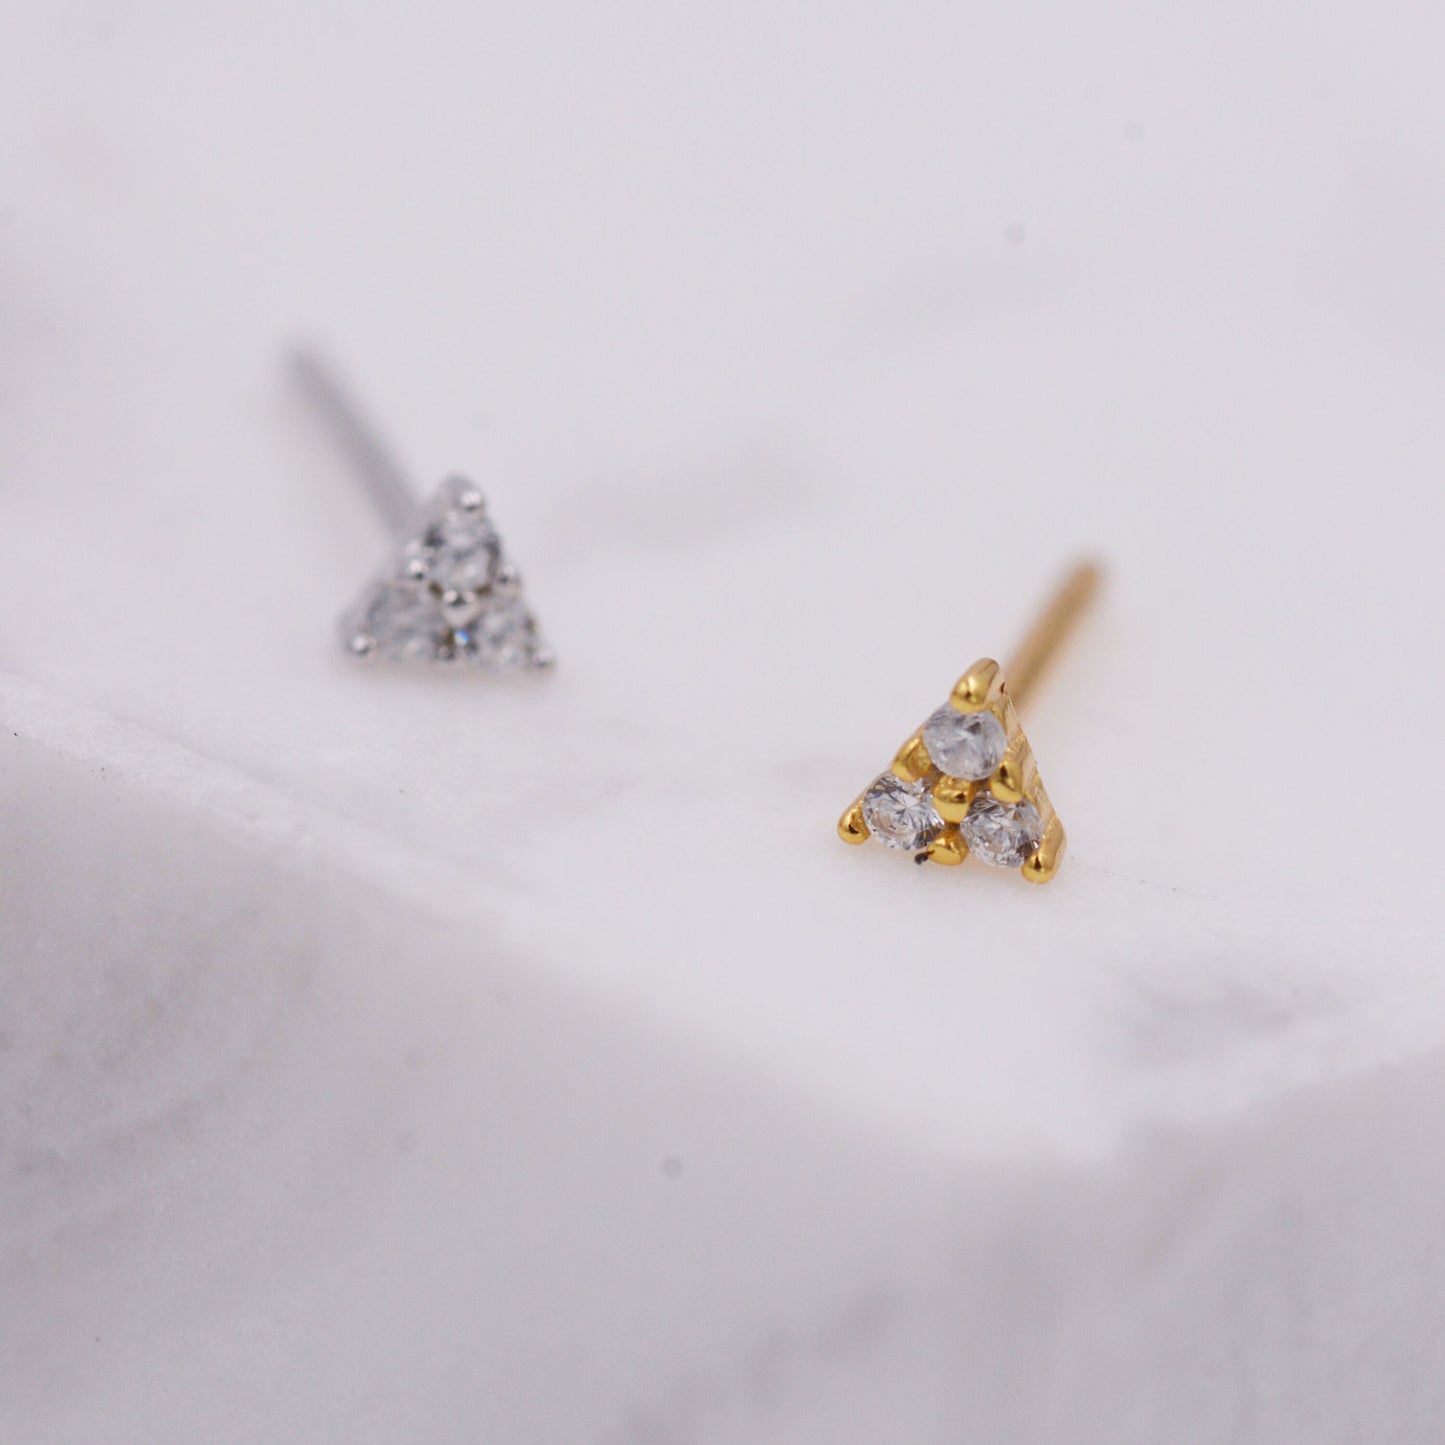 Three CZ Crystal Tiny Stud Earrings in Sterling Silver, Trinity Stud, Three Ball Stacking Earrings, Ear Stacks, Extra Tiny, Triple CZ